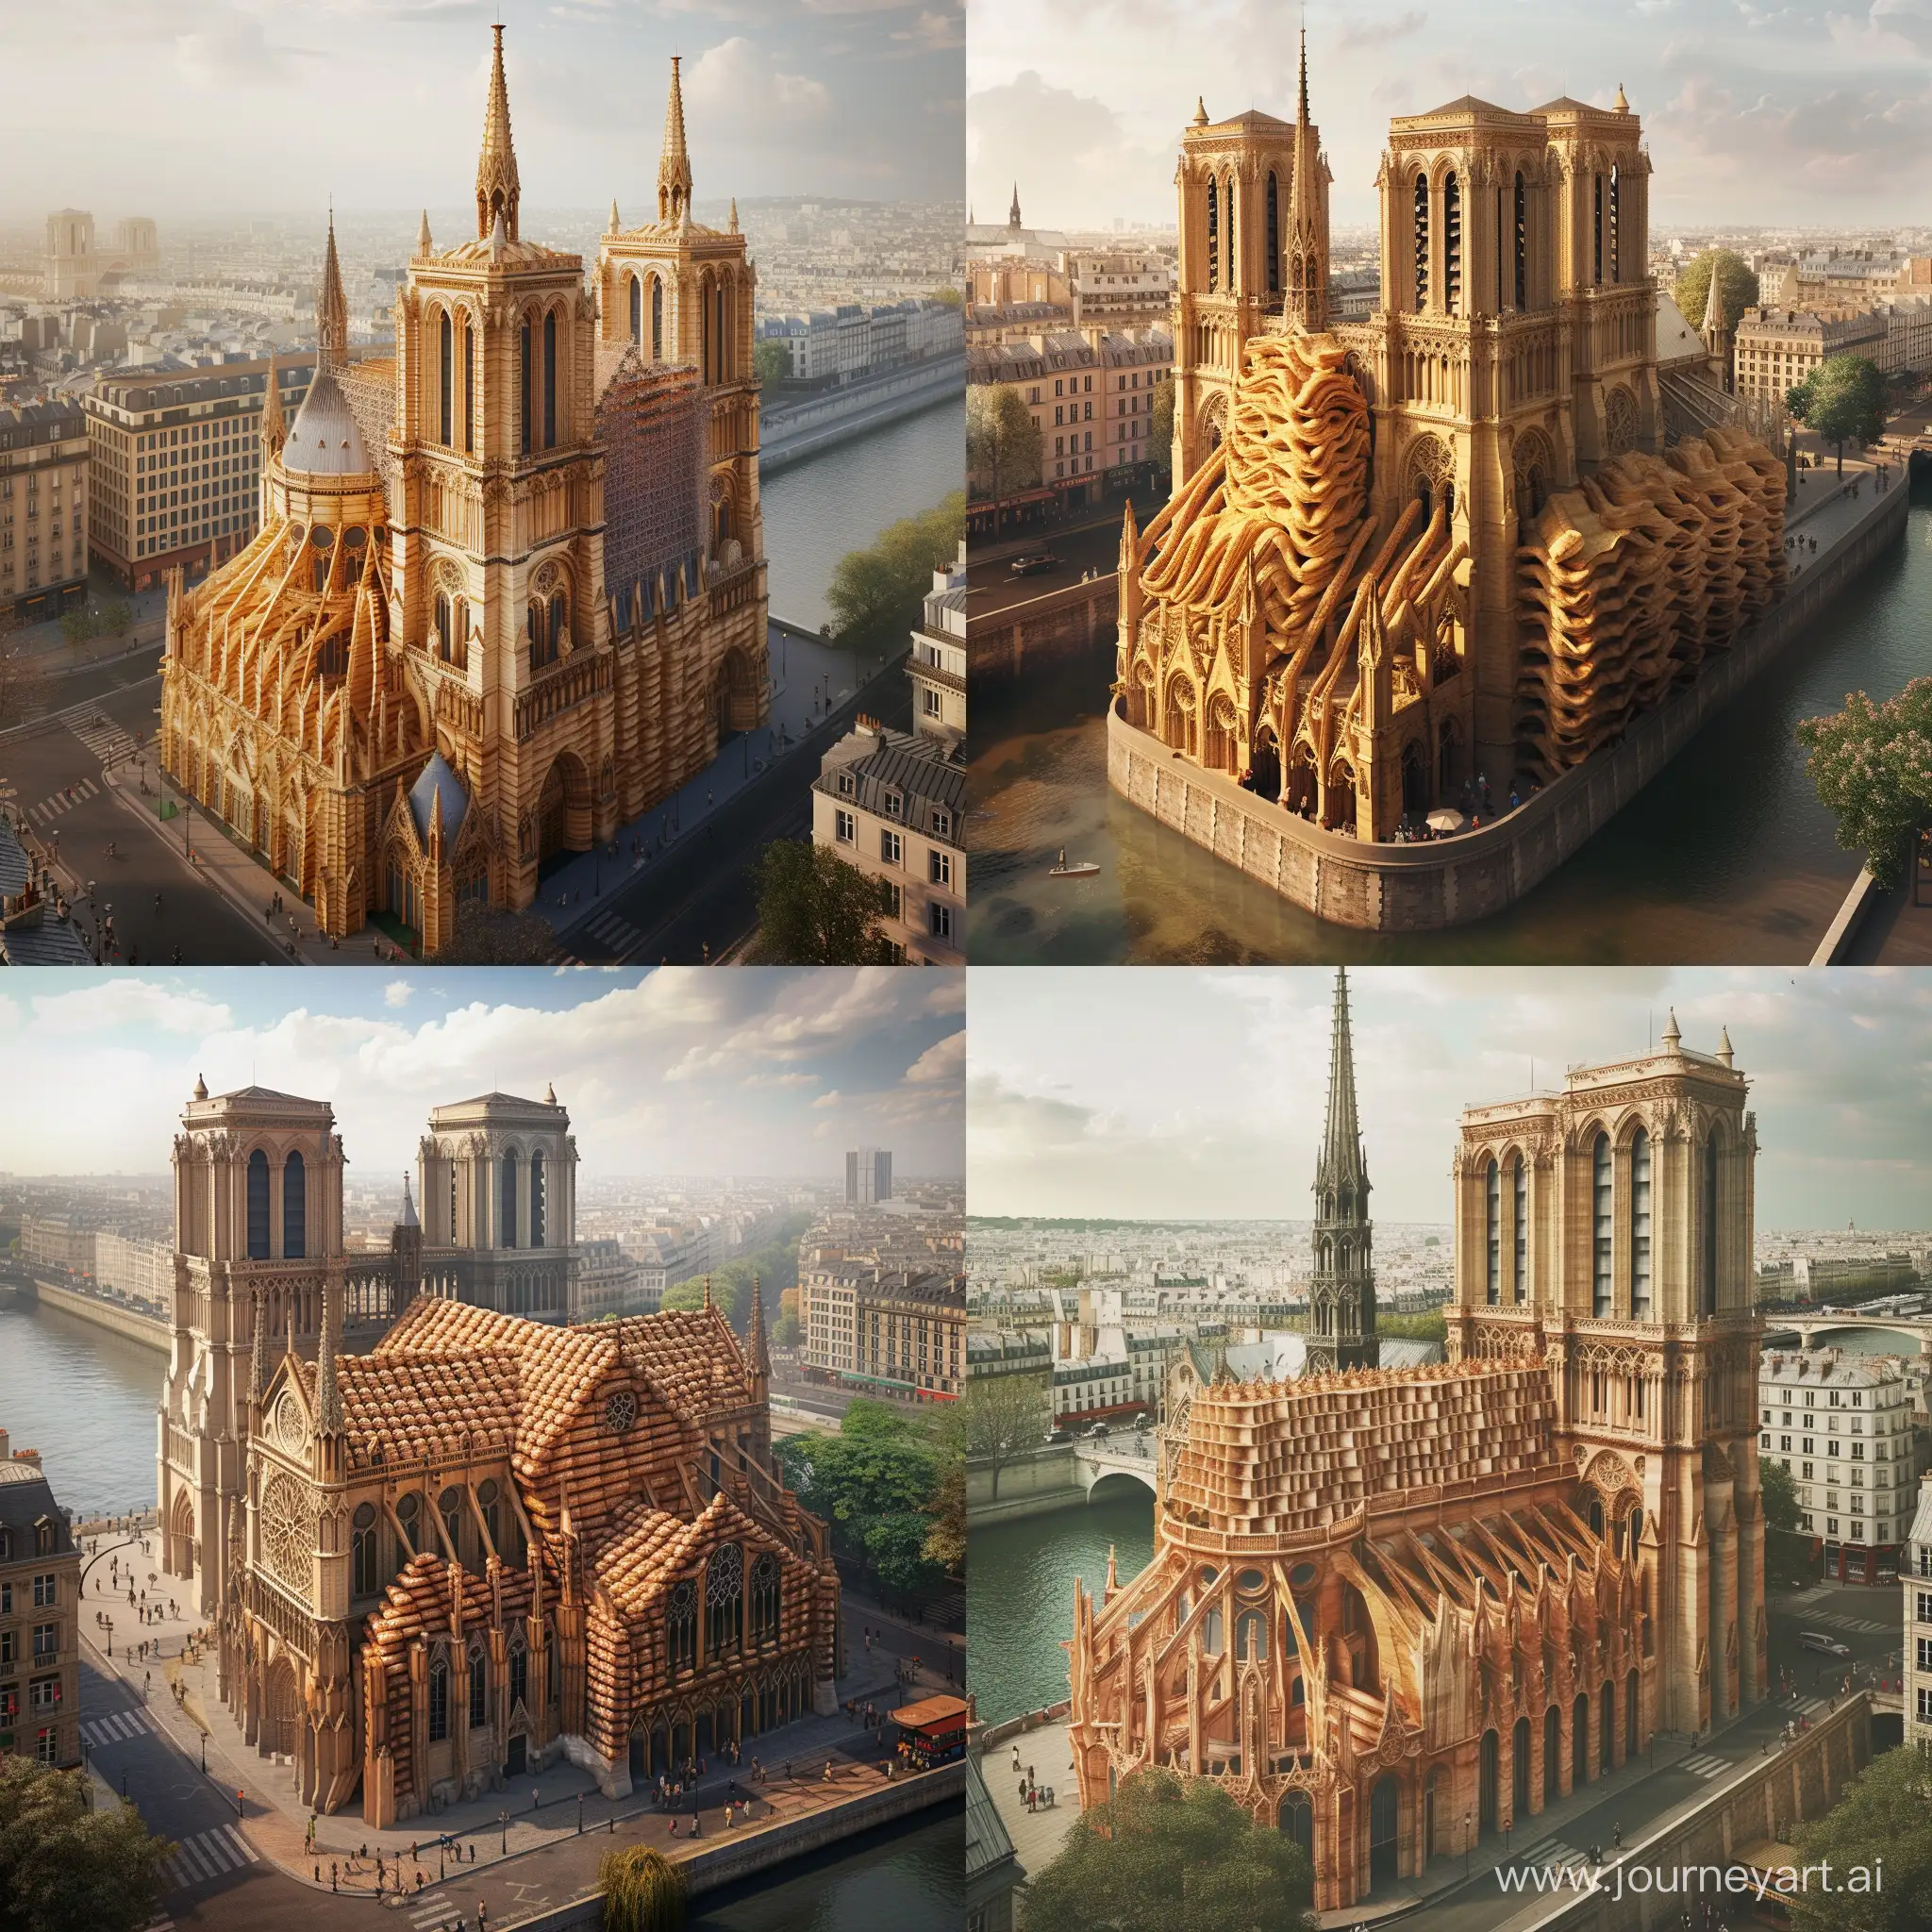 Generate a highly realistic image of Notre Dame Cathedral transformed into a stunning structure made entirely of mille-feuille pastries, seamlessly integrated into its authentic urban environment in Paris.  Mille-feuille Notre Dame Details:  Ensure that the layers of mille-feuille mimic the intricate architectural details of Notre Dame, including the spires, flying buttresses, and ornate facades. Emphasize the delicate and flaky texture of the mille-feuille layers, aiming for a realistic portrayal of the pastry's appearance. Urban Environment:  Set the scene in Paris, preserving the recognizable elements of the cityscape, including nearby buildings, streets, and the Seine River. Pay meticulous attention to scale and perspective, ensuring that the mille-feuille Notre Dame fits seamlessly into the historic city setting. Reflect the actual weather conditions, capturing the nuances of natural light, shadows, and atmospheric effects. Additional Details:  Include realistic reflections on nearby structures and the river to enhance the integration of the mille-feuille Notre Dame into the urban environment. Consider adding subtle elements like pedestrians, street vendors, or other Parisian features to enhance the sense of realism. Overall Atmosphere:  Strive for a harmonious blend of the whimsical mille-feuille structure and the authentic Parisian setting. Prioritize realism in both the pastry details and the urban environment to create an image that appears genuinely captivating and plausible.